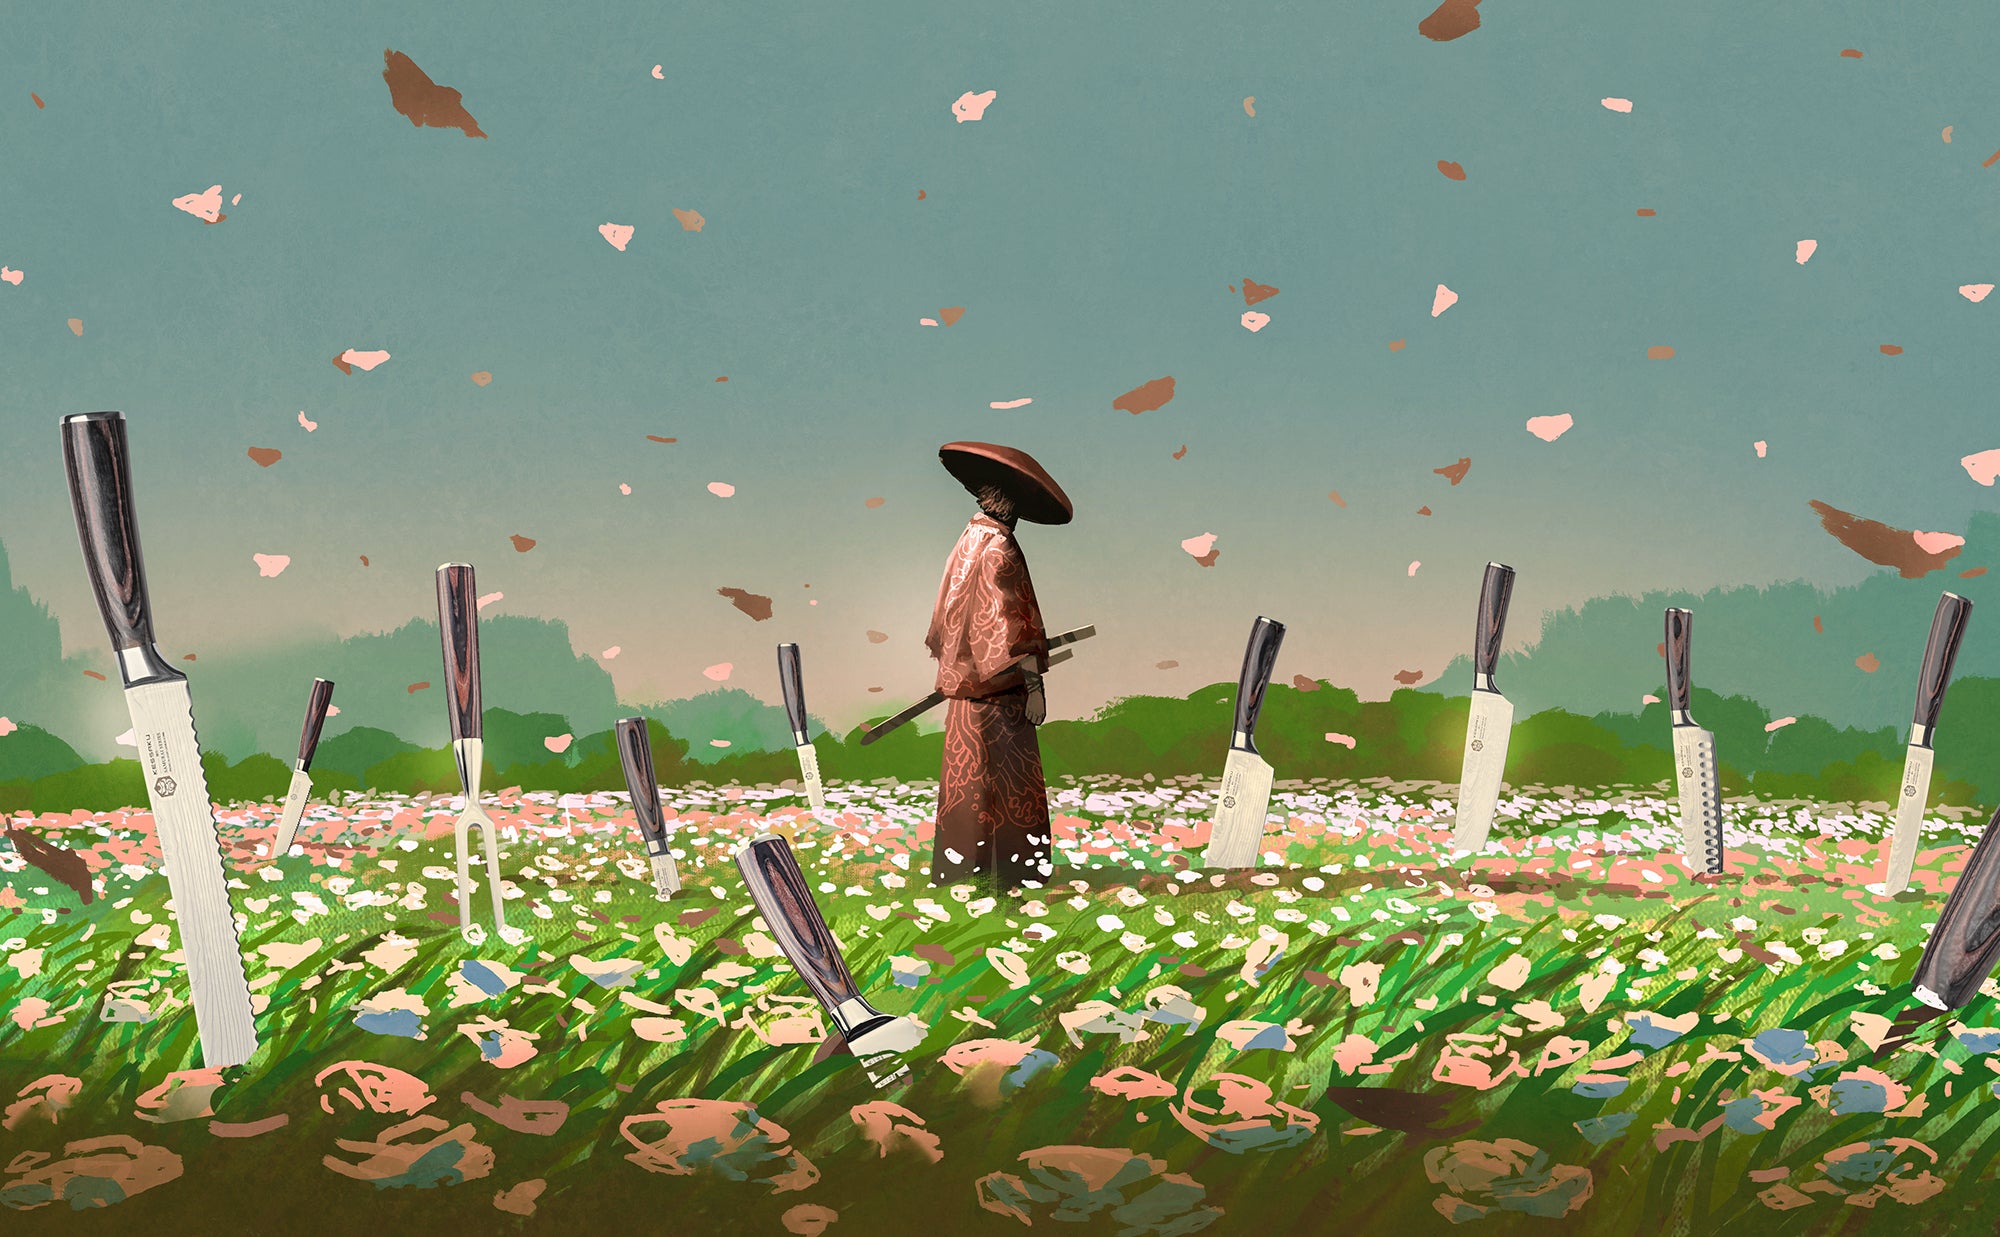 An illustration of a Samurai warrior in a field with the Samurai Series Knives piercing the ground.